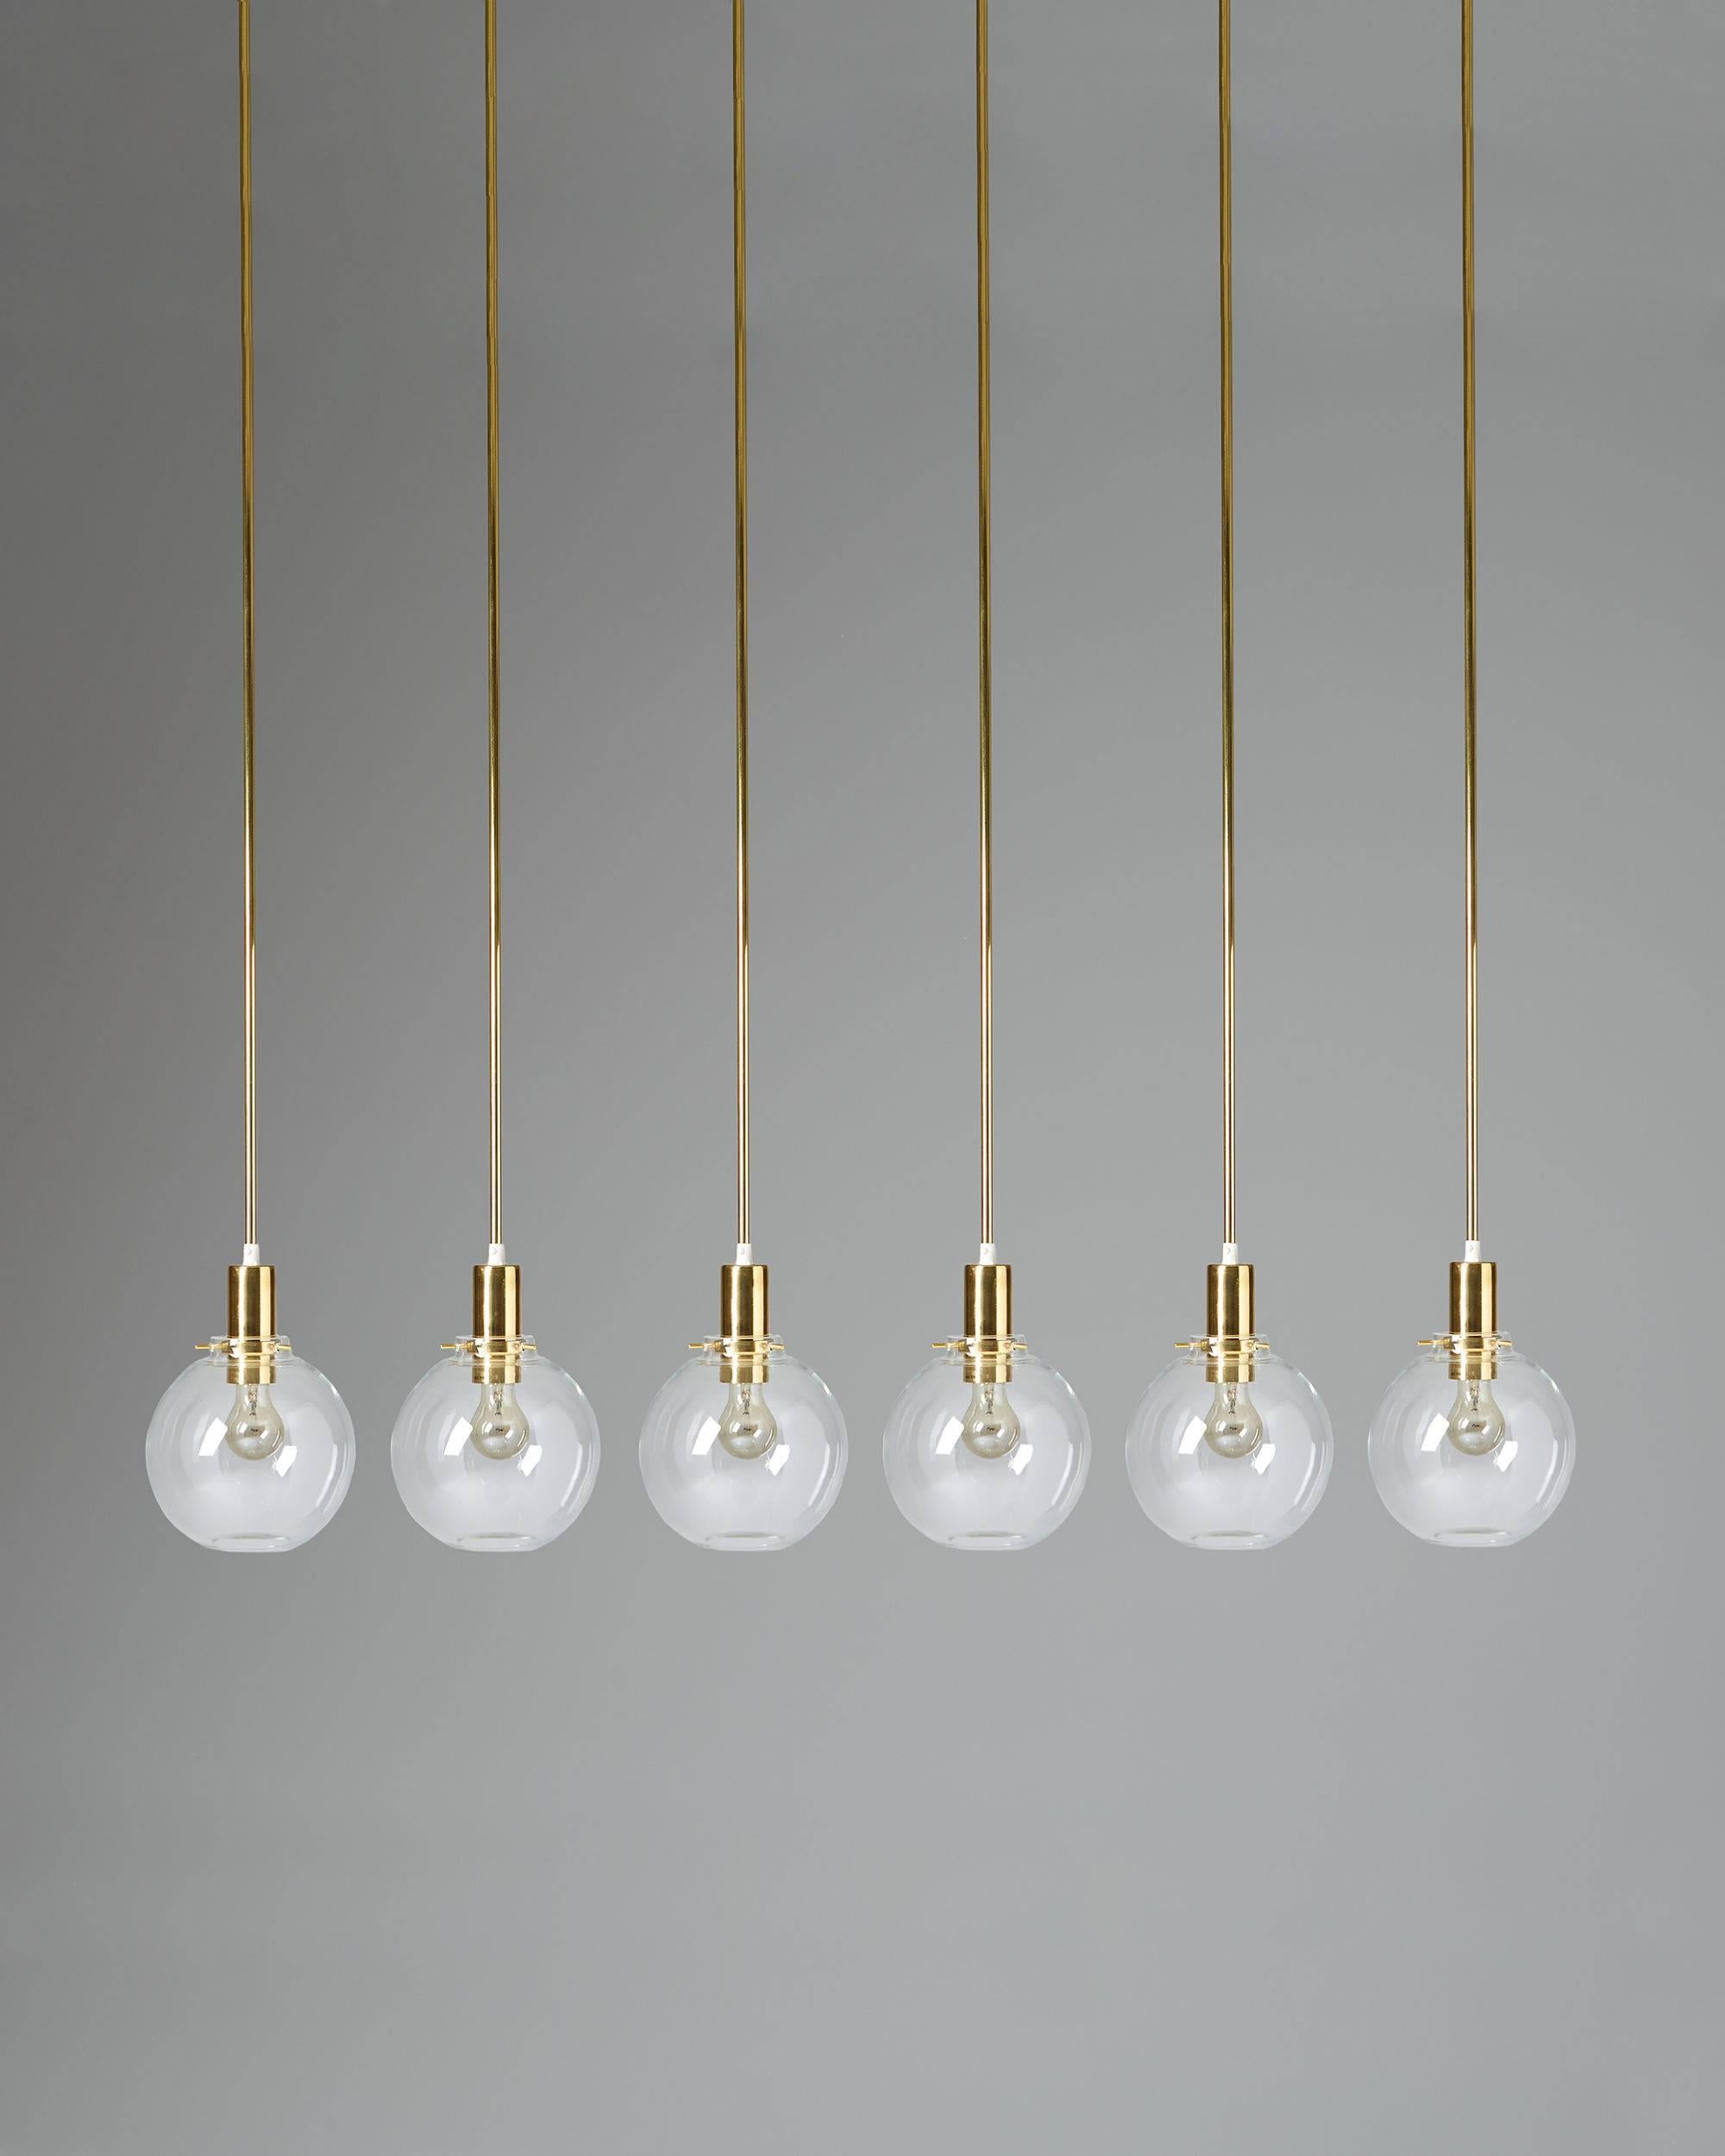 Long ceiling lamps designed by Hans-Agne Jakobsson, Sweden, 1960s.
Brass and glass.
Six available.